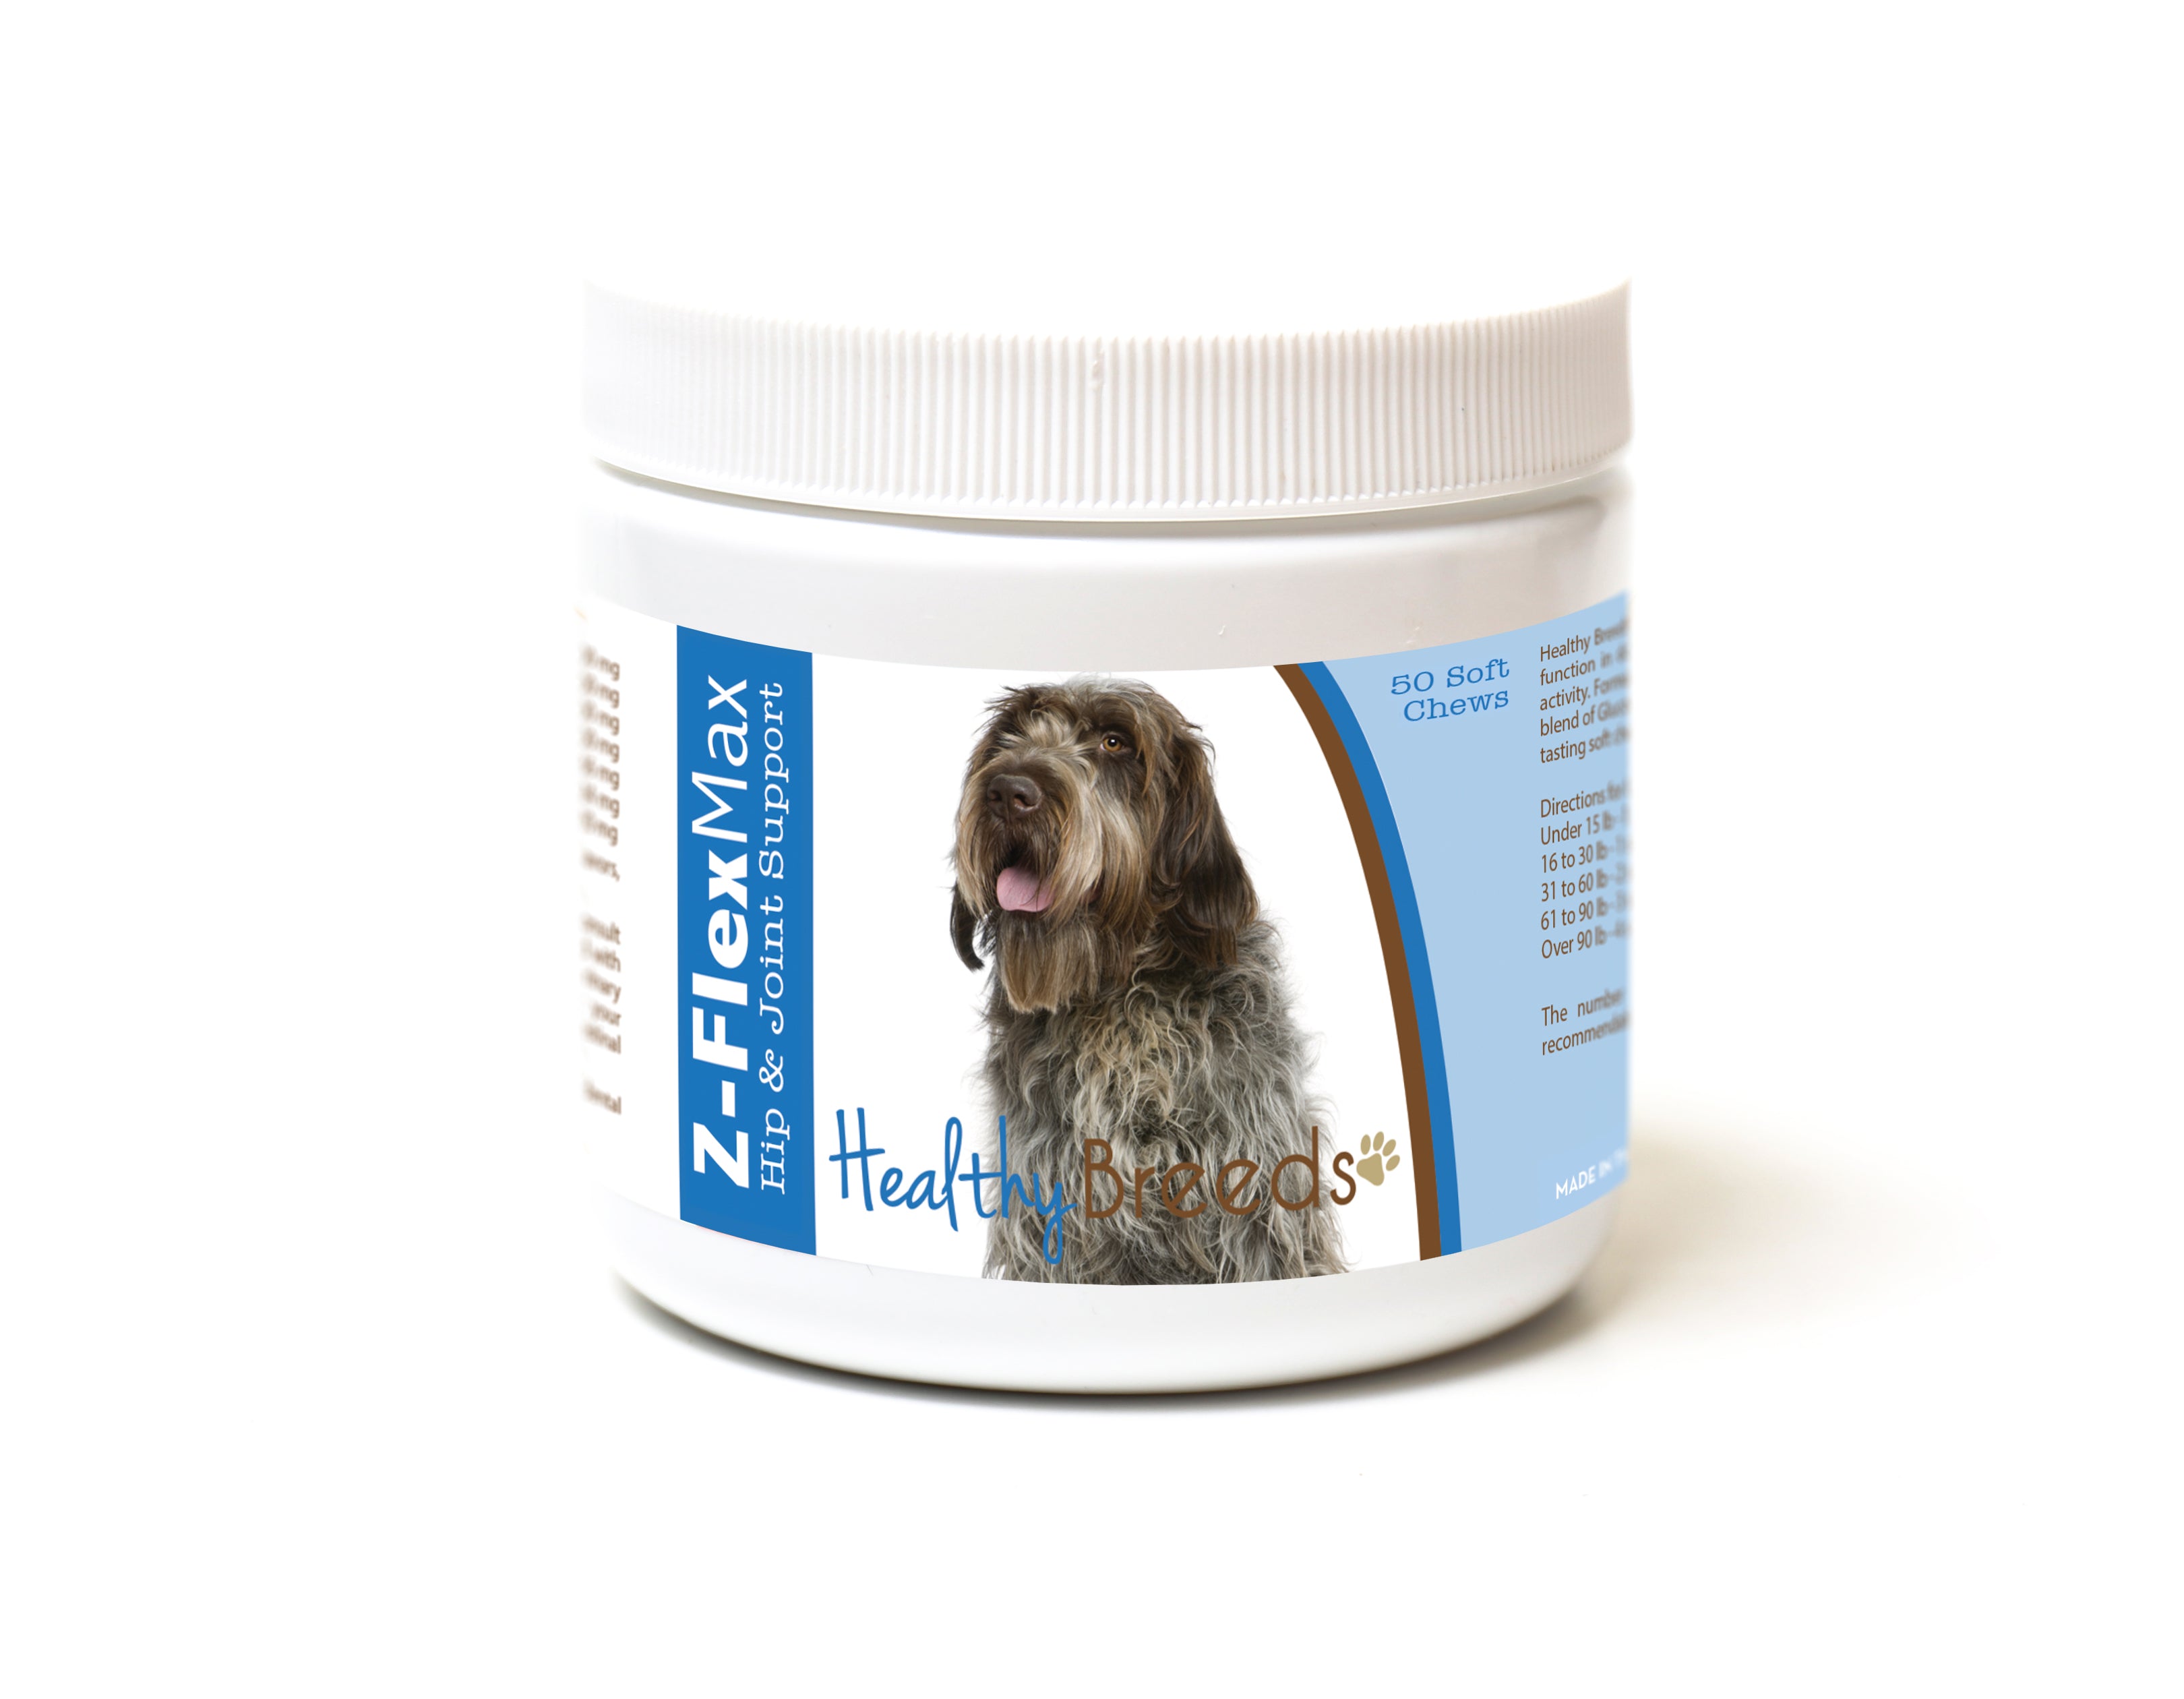 Wirehaired Pointing Griffon Z-Flex Max Hip and Joint Soft Chews 50 Count